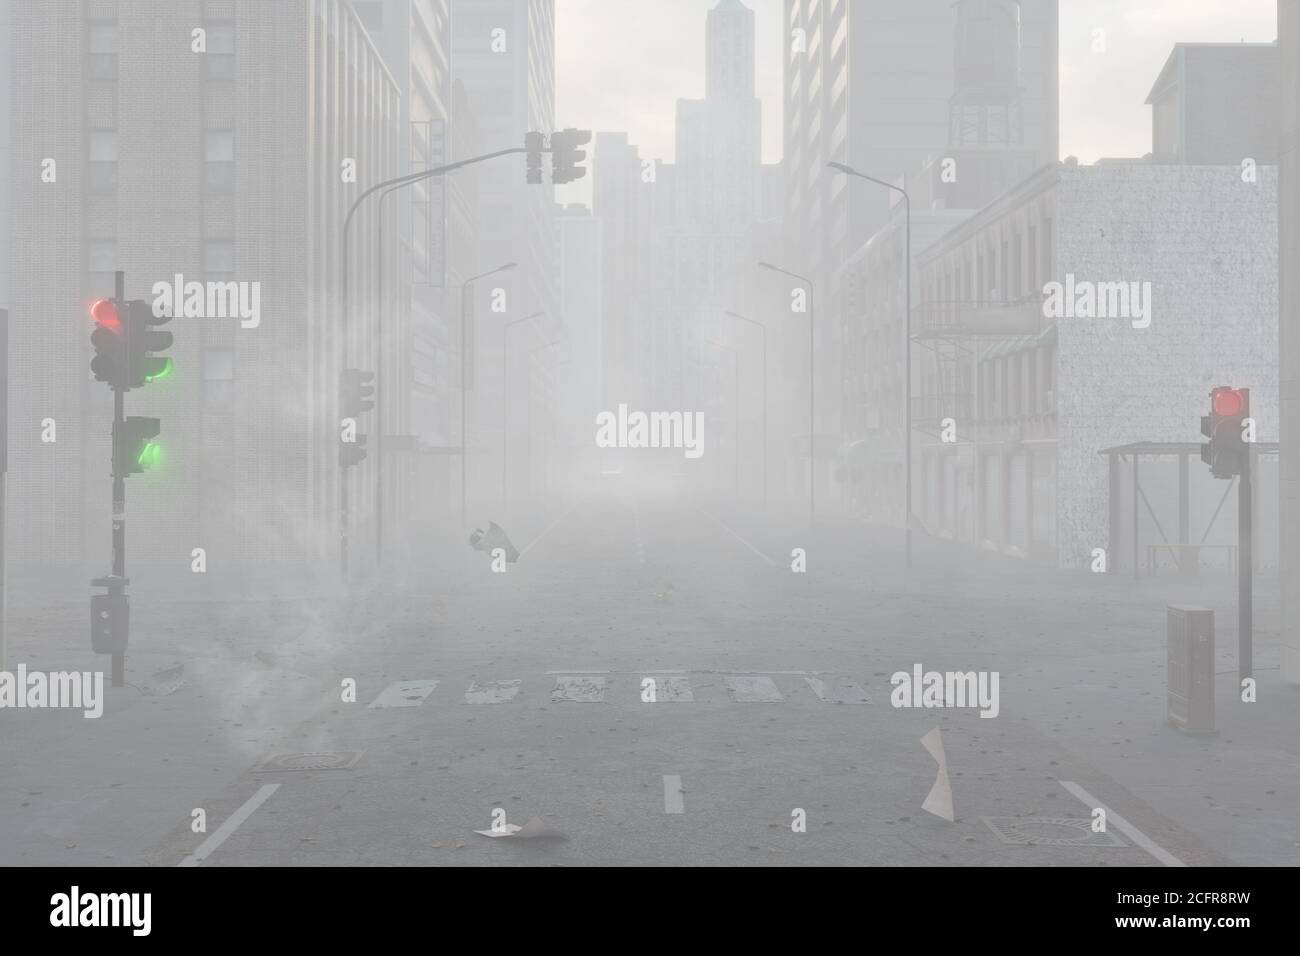 3d rendering of urban foggy city with illuminated traffic lights and pedestrian crossing Stock Photo